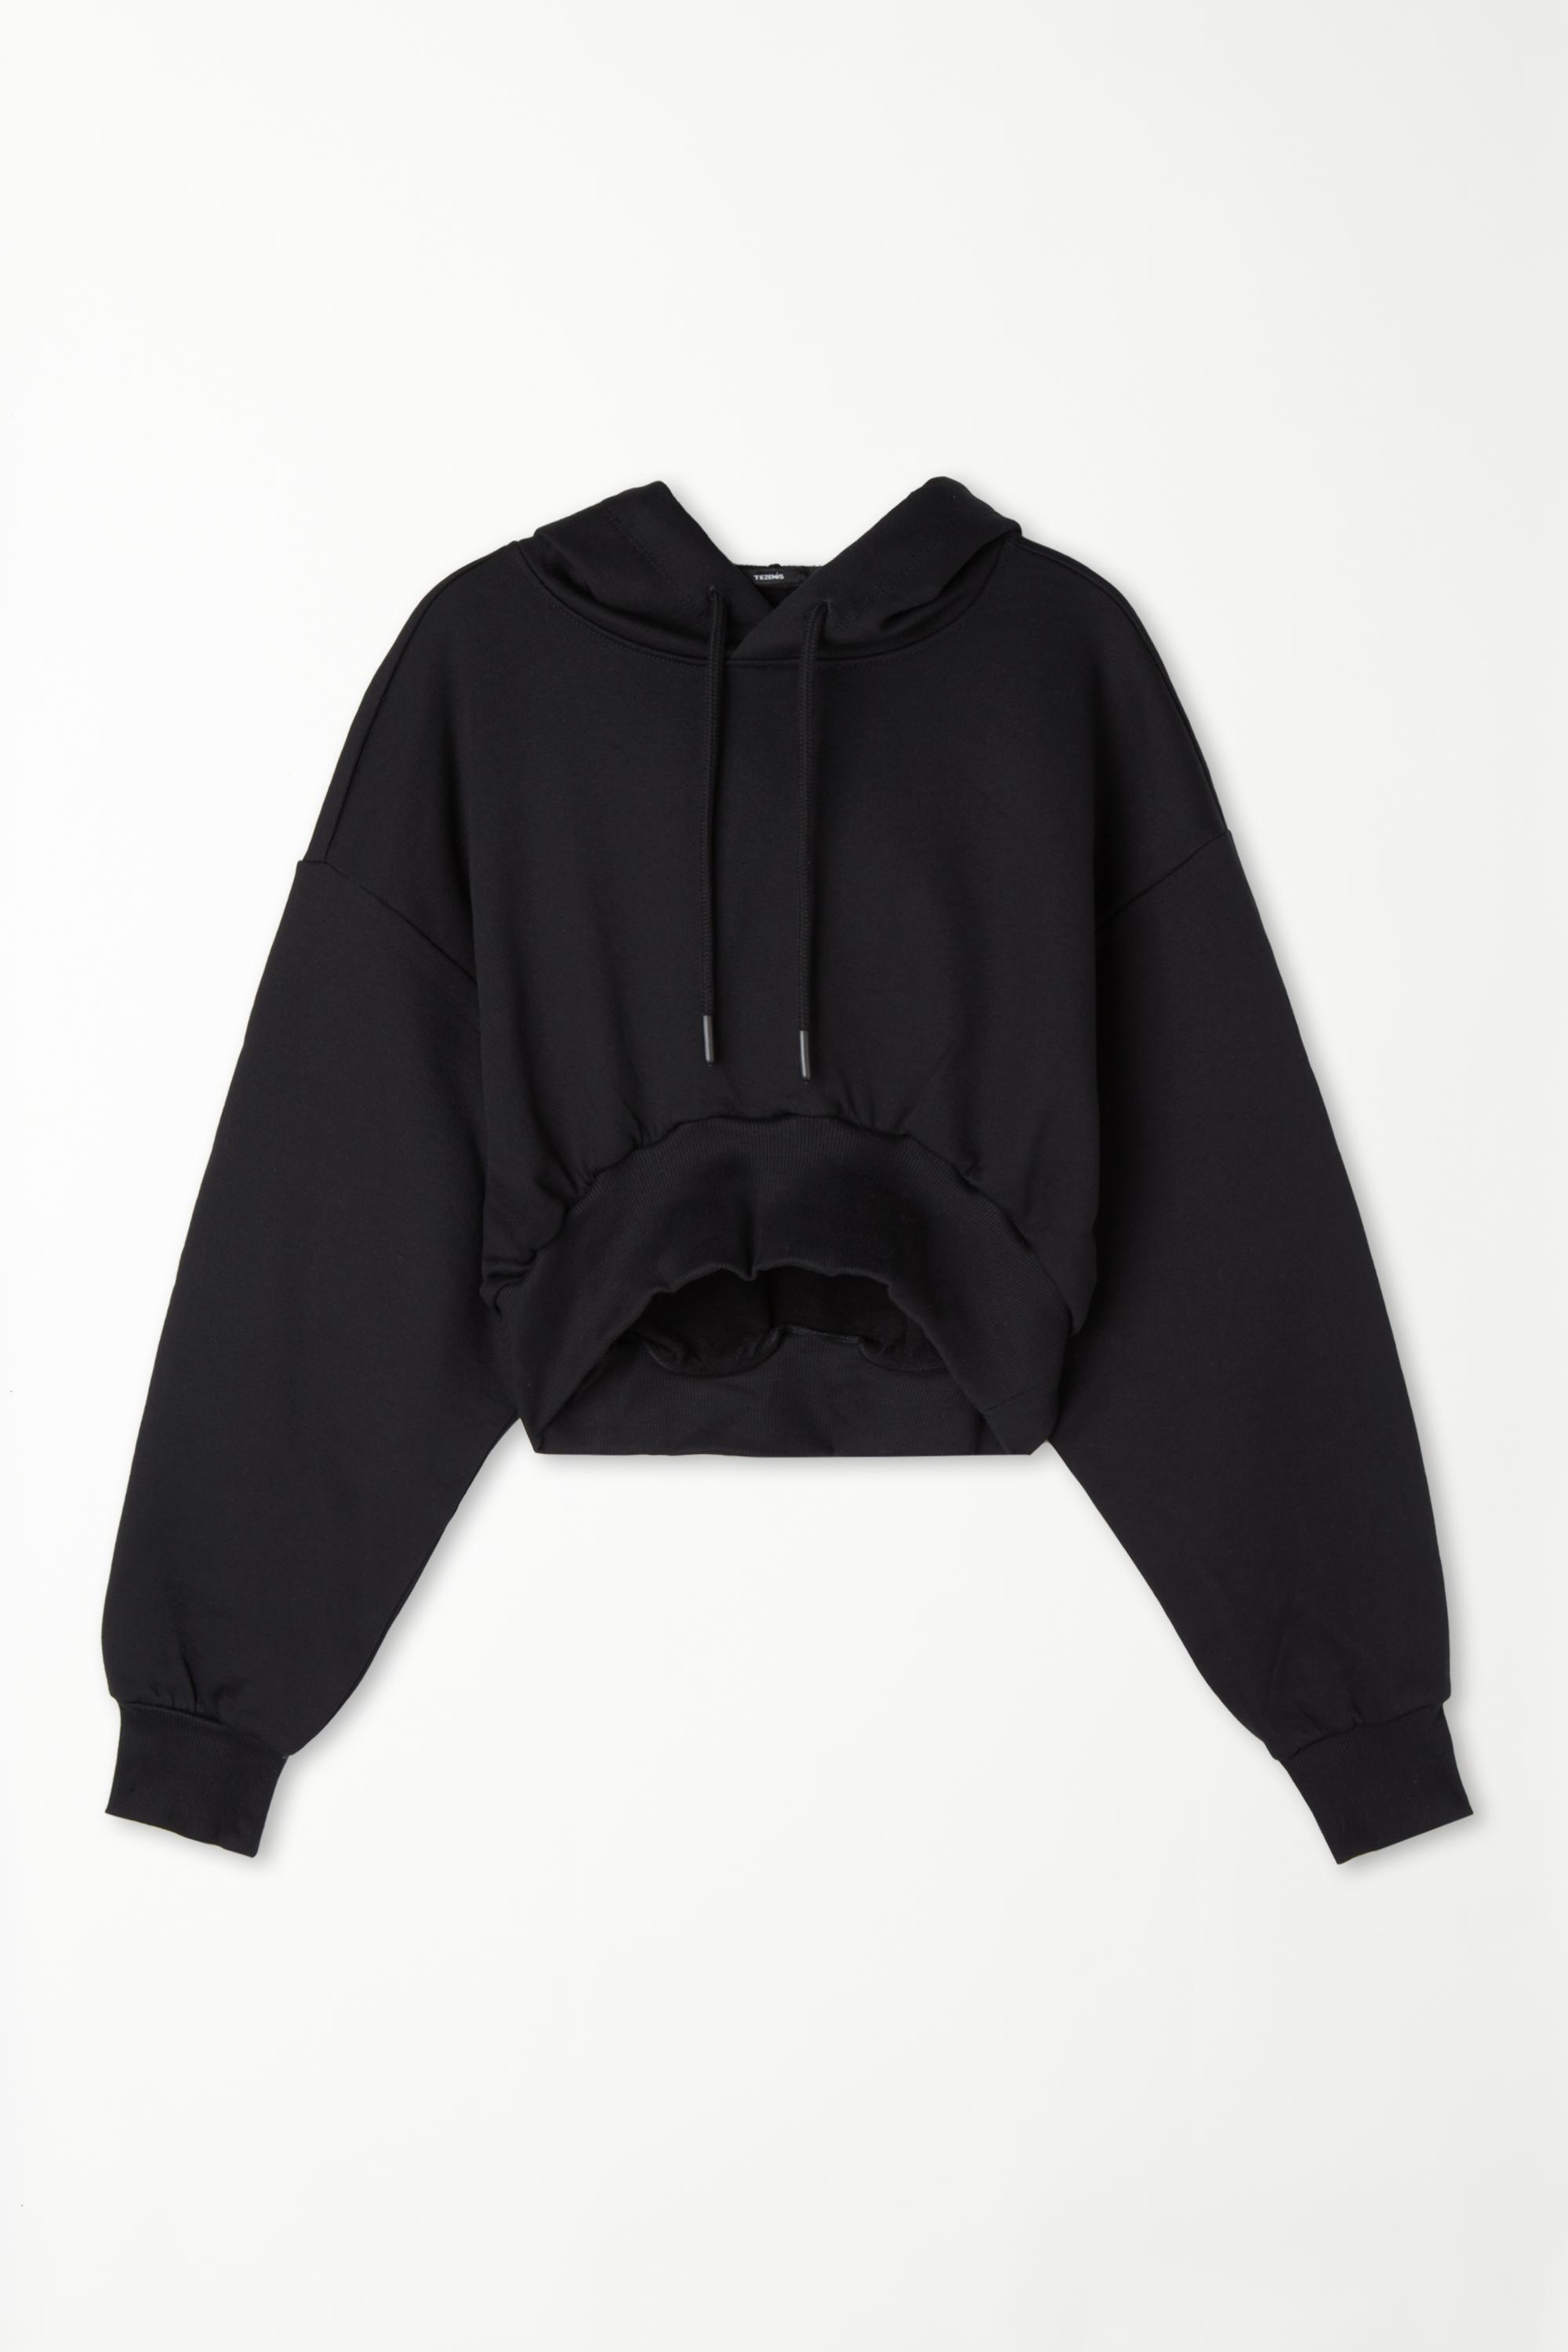 Short Thick Hoodie with Long Sleeves and Dropped Shoulders